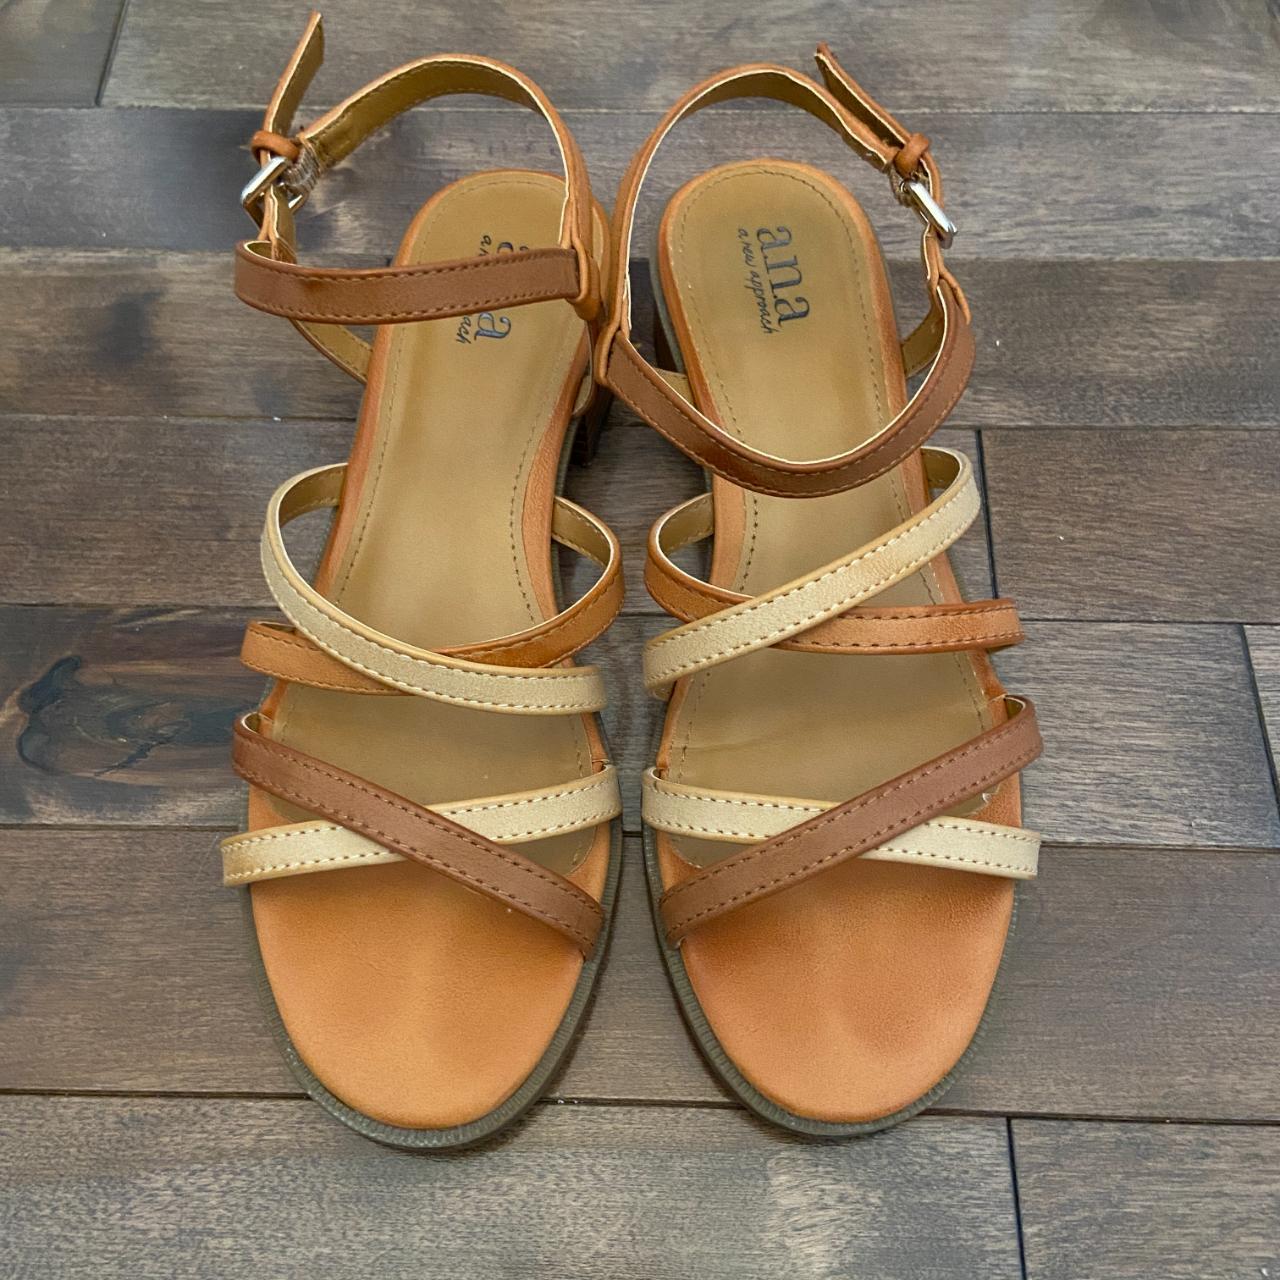 JCPenney Women's Brown and Cream Sandals | Depop